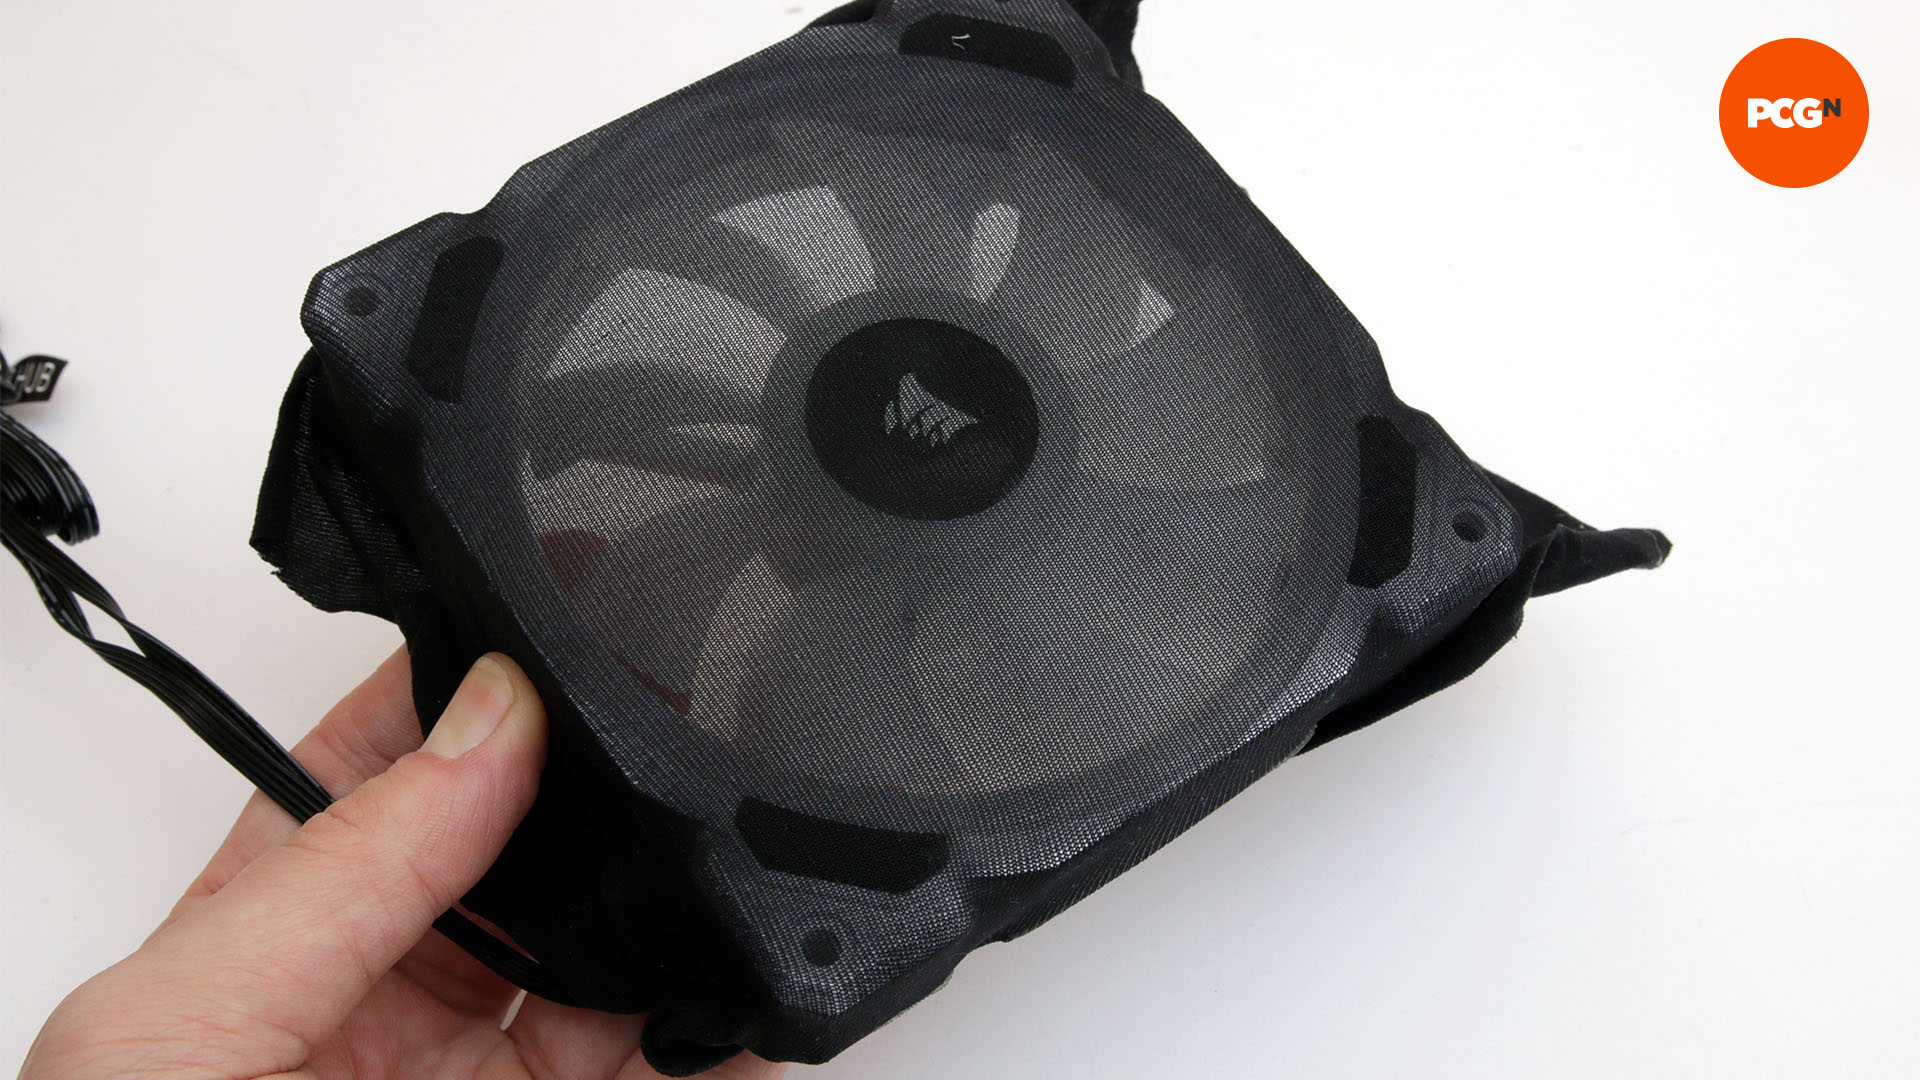 How to stop dust getting into your PC: Stretch pantyhose over fan frame